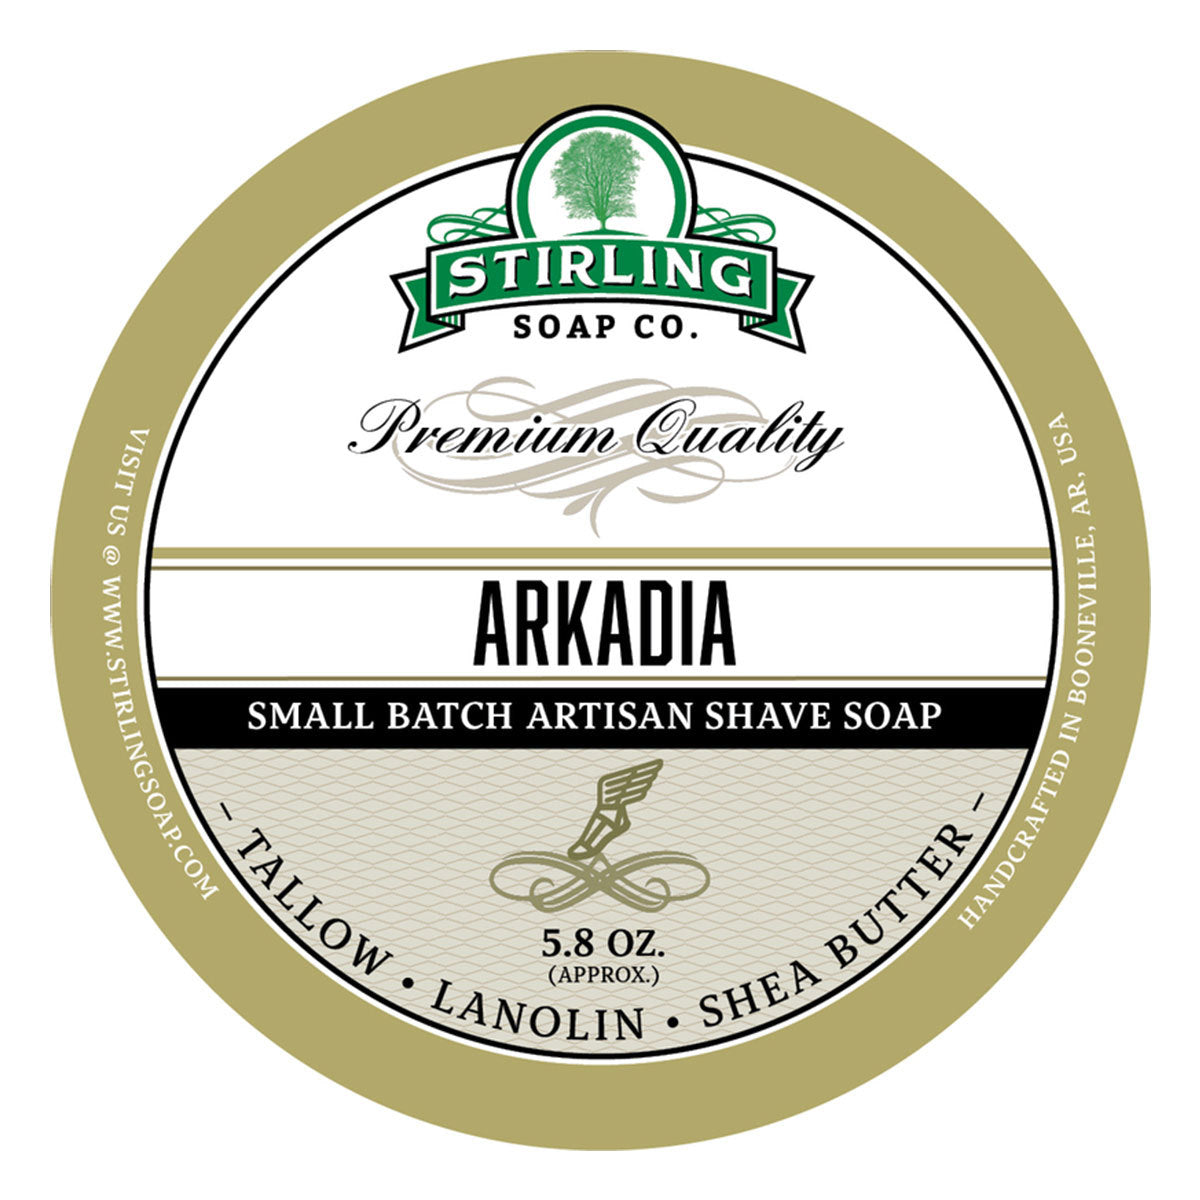 Primary image of Arkadia Shave Soap